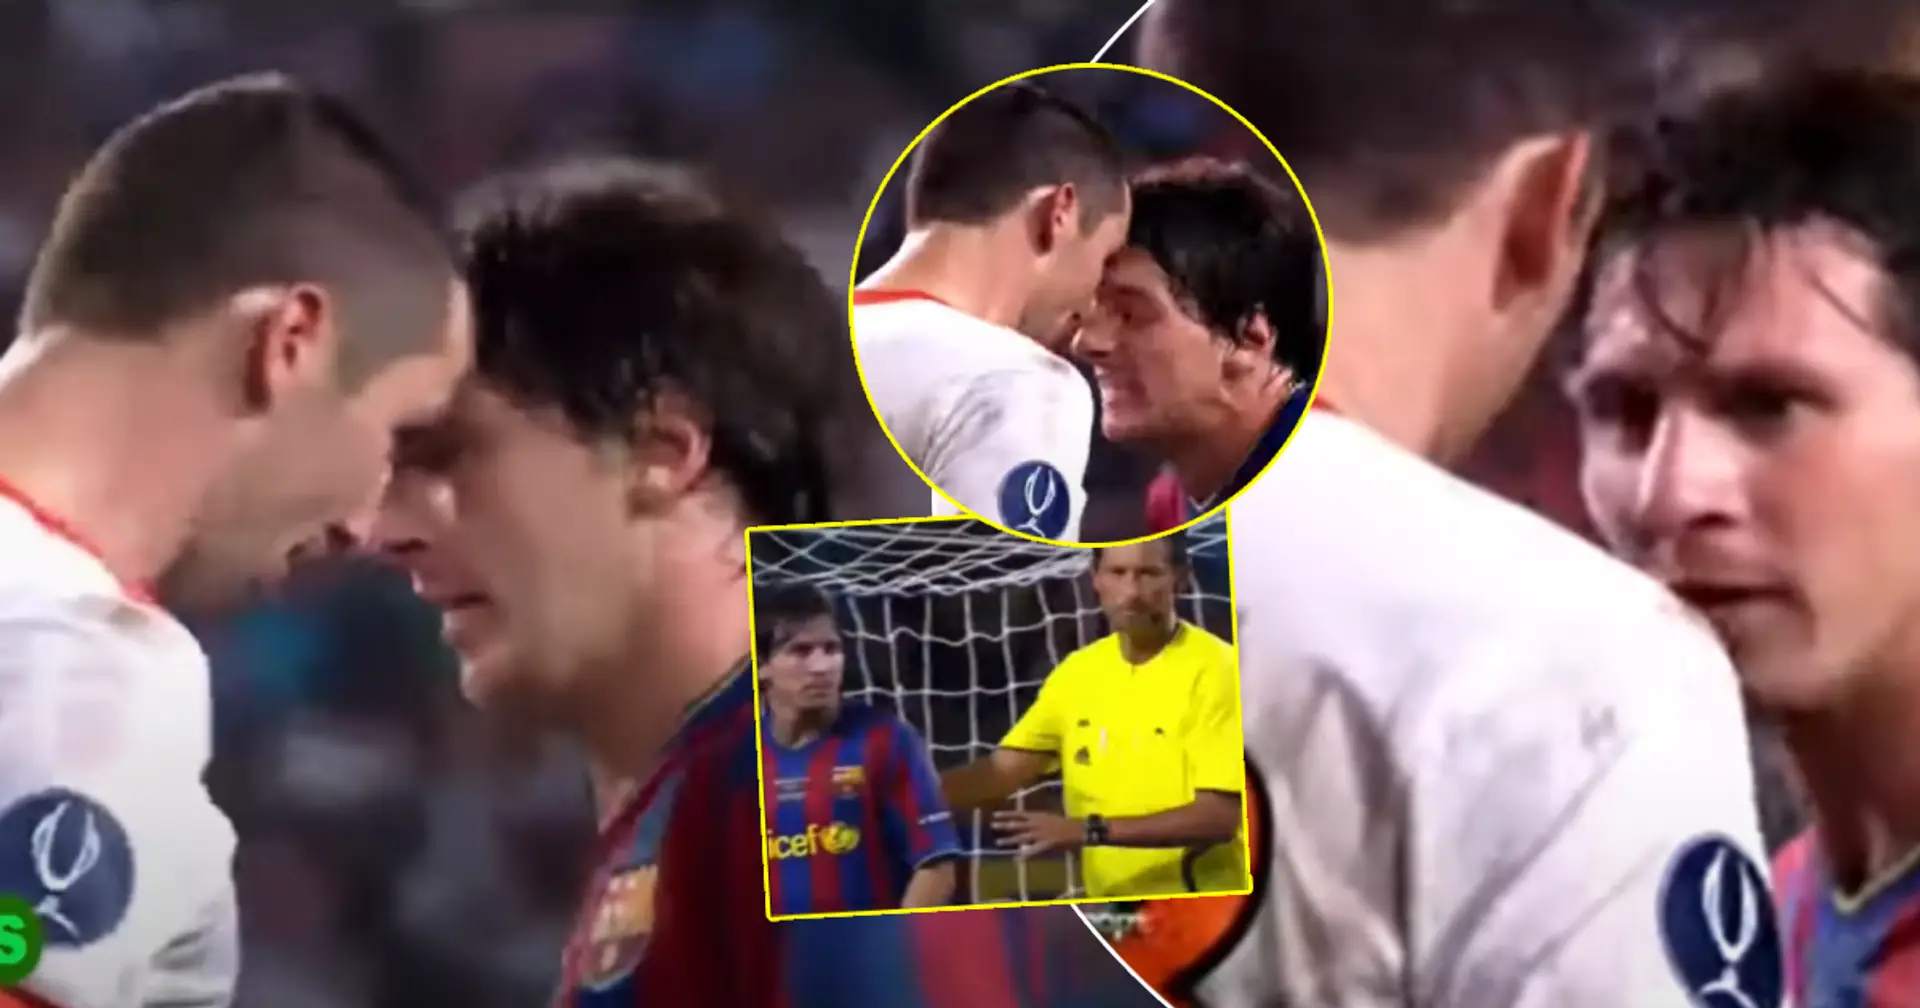 'That day Messi turned to prime Pepe': How Leo once unleashed anger on opponent for failed move